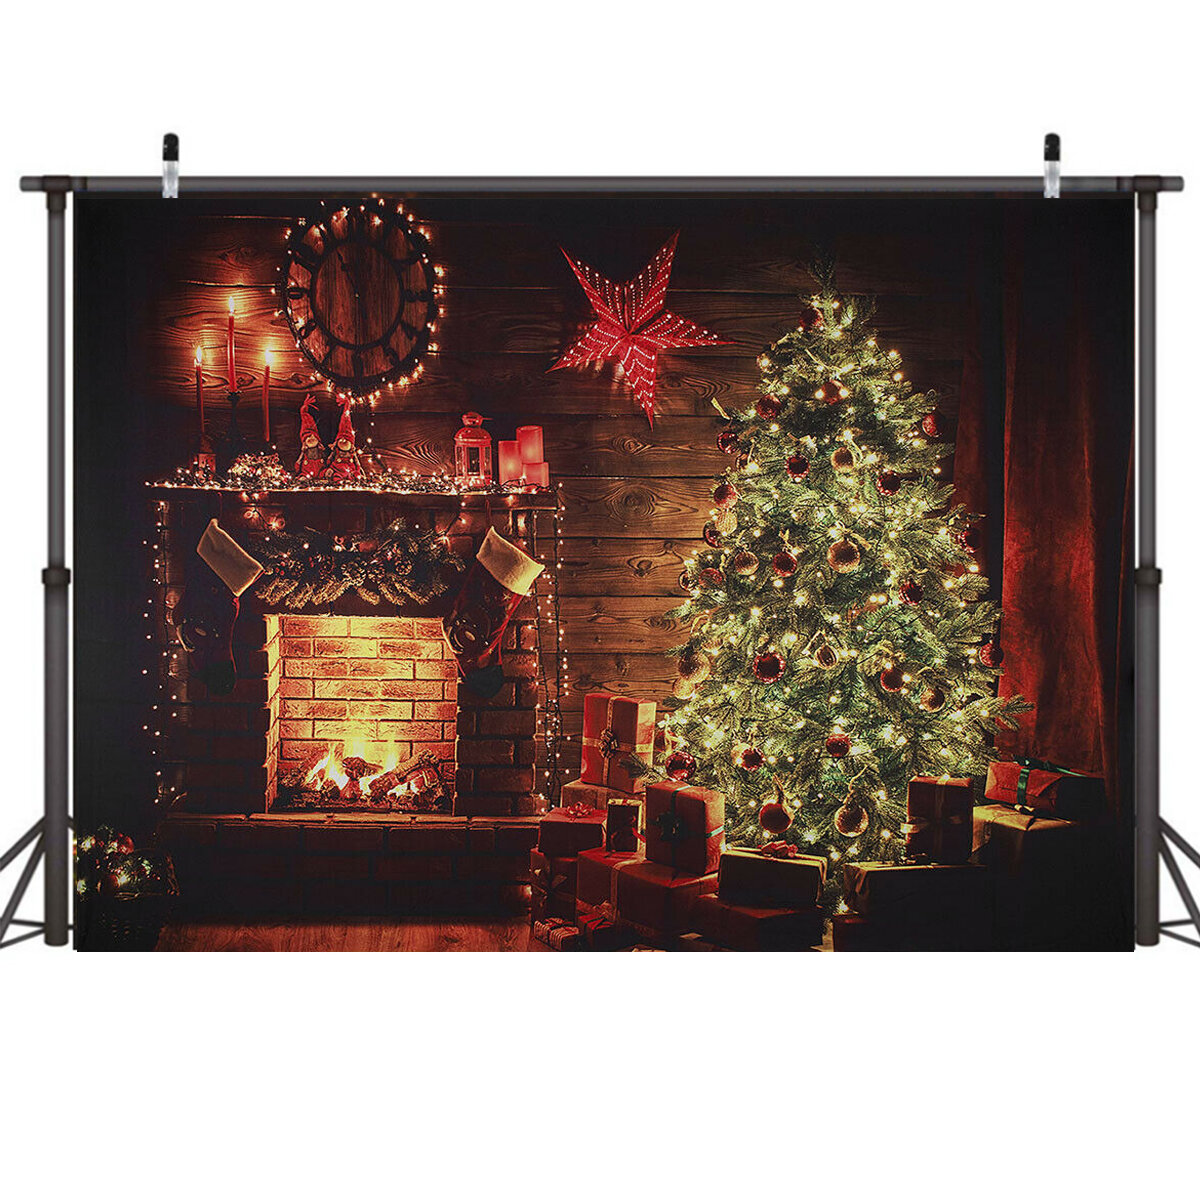 Large Christmas Photography Background Studio Cloth Backdrop Party Decorations Photo Booth Backdrops